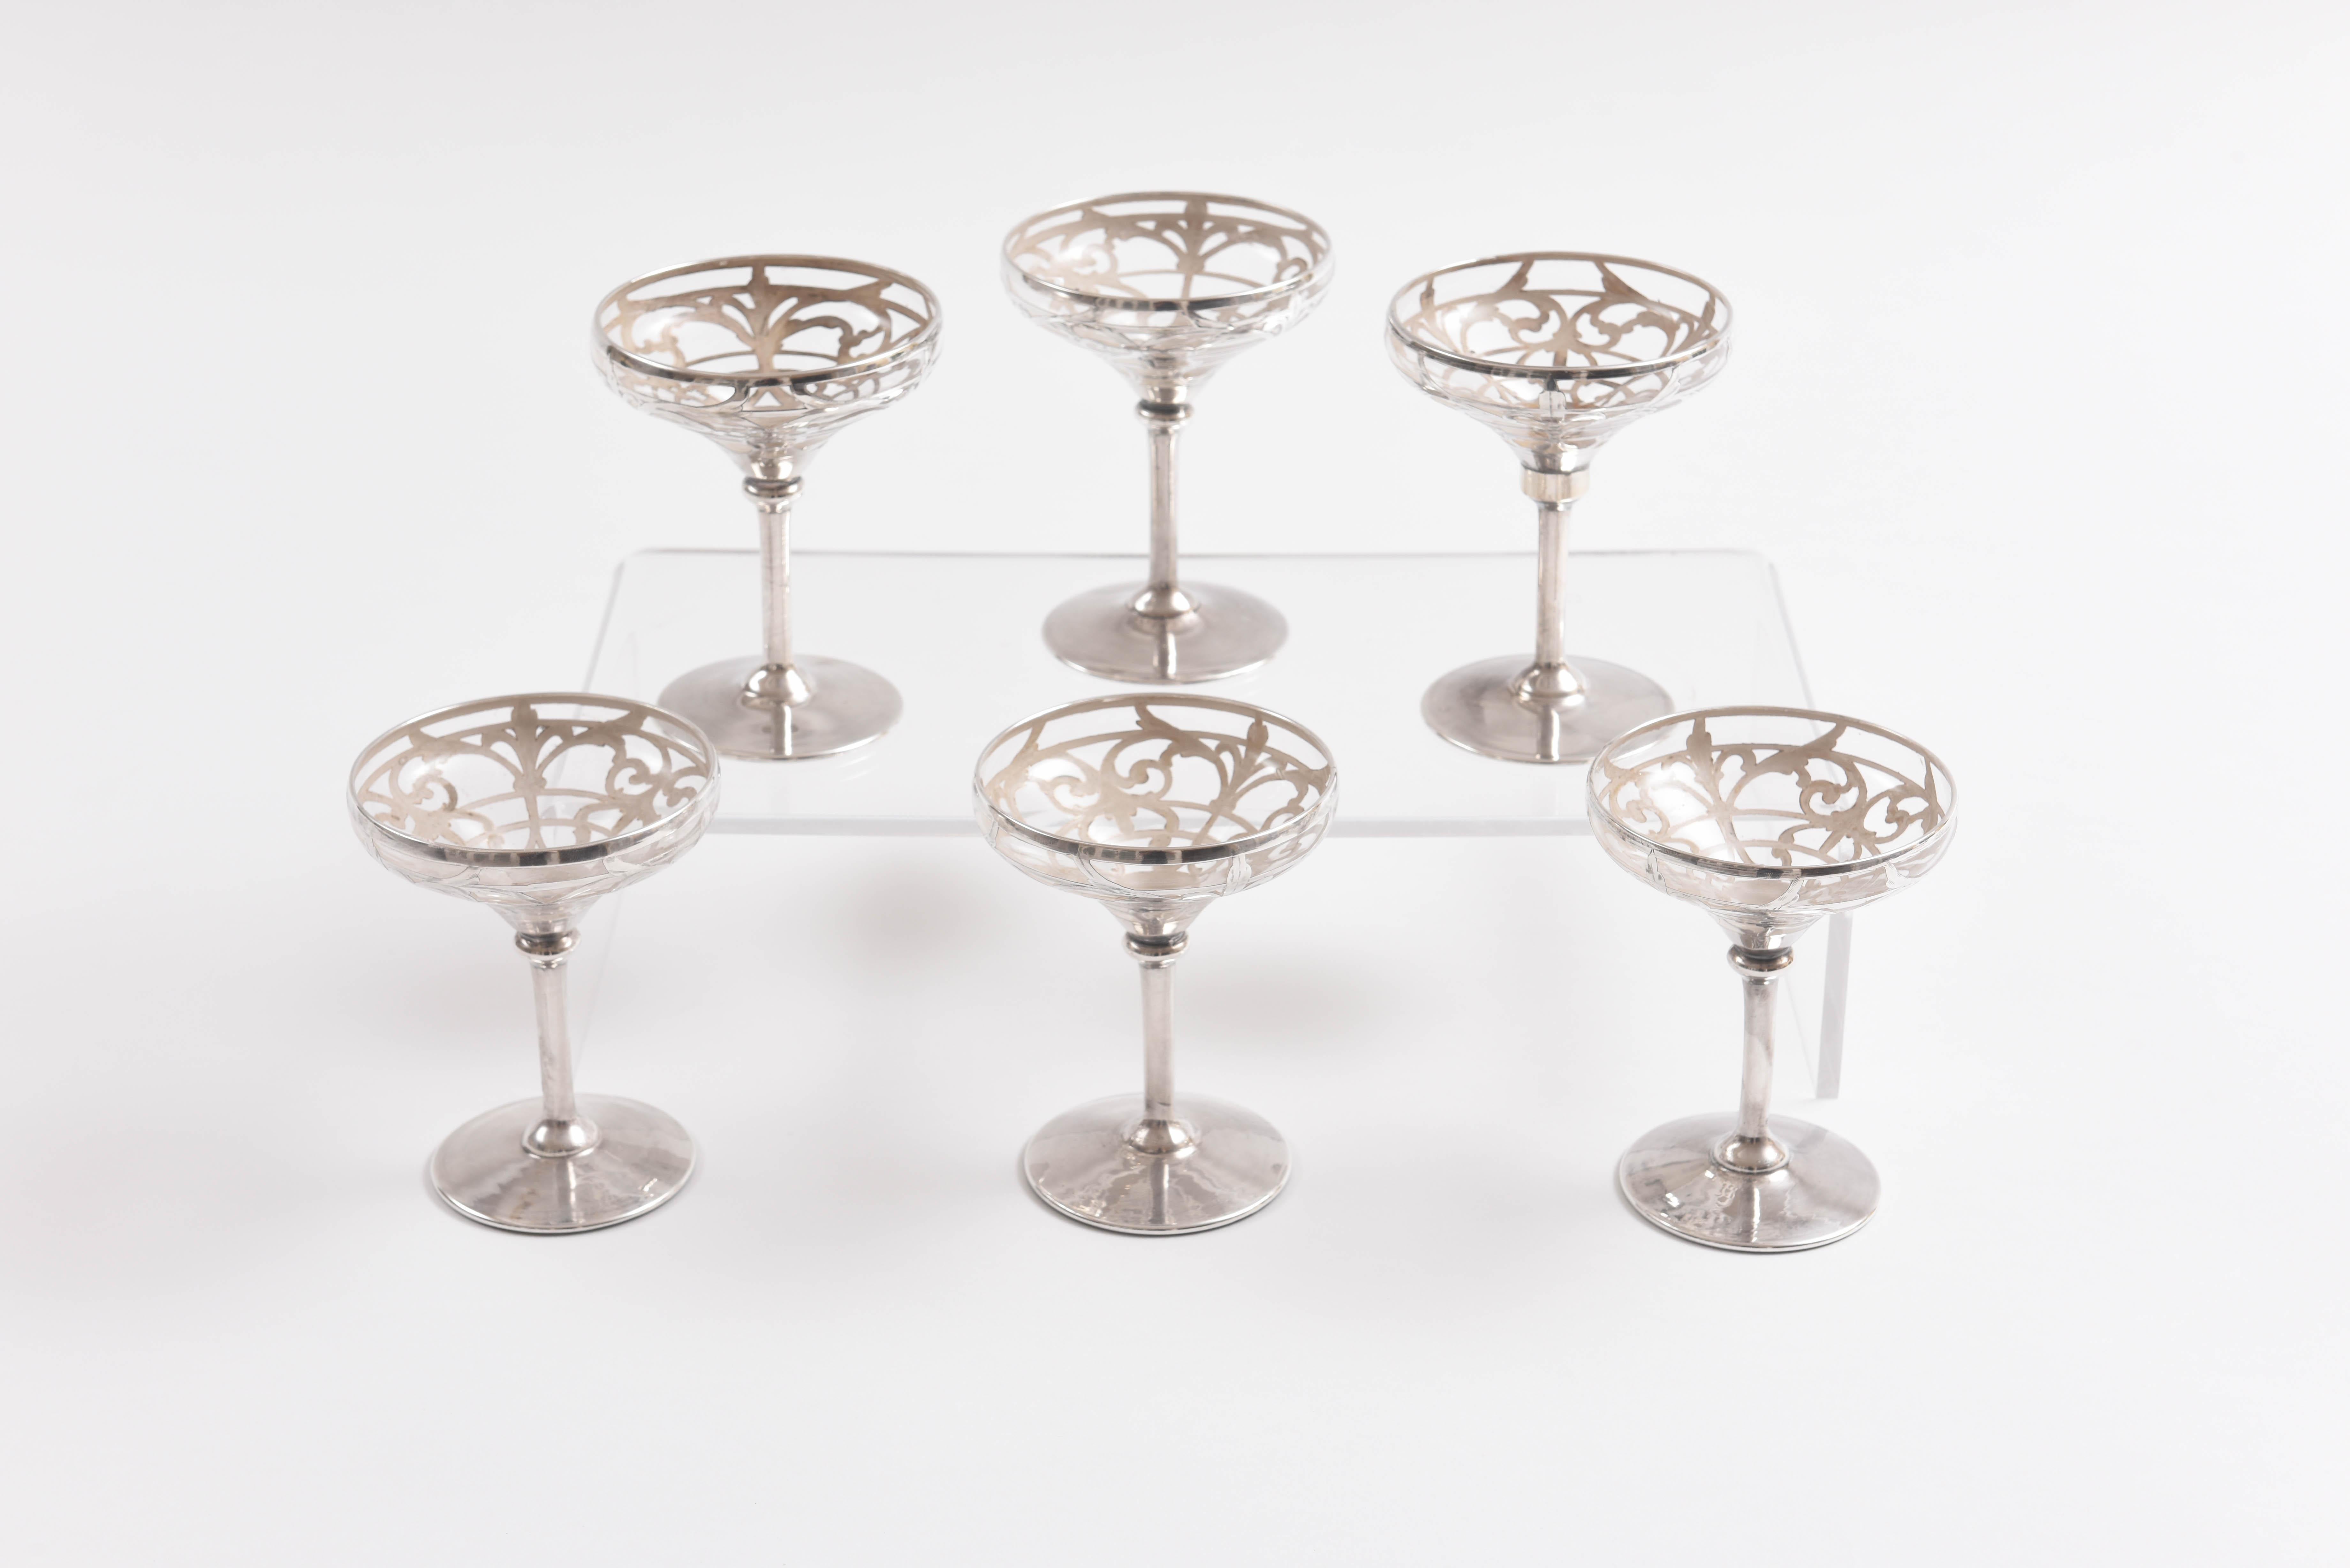 A fine set of champagne glasses that feature hand chased sterling silver on blown glass. A perfect size for sipping and also perhaps for intermezzo or sorbet. These are in Fine antique condition and will mix and match nicely in with all your fine